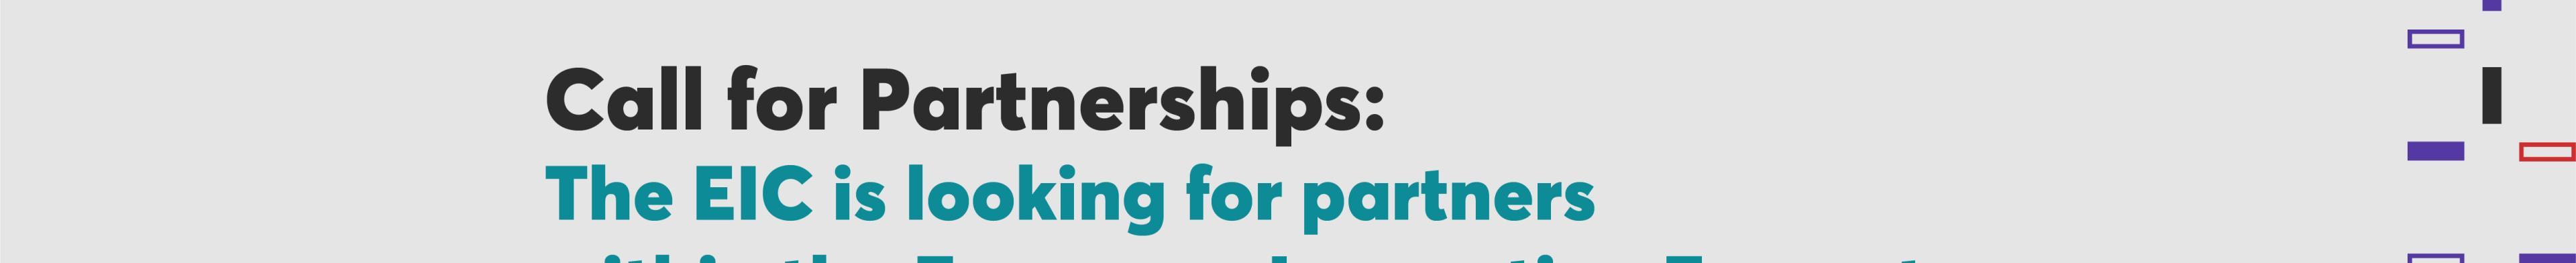 Call for Partnerships EIC